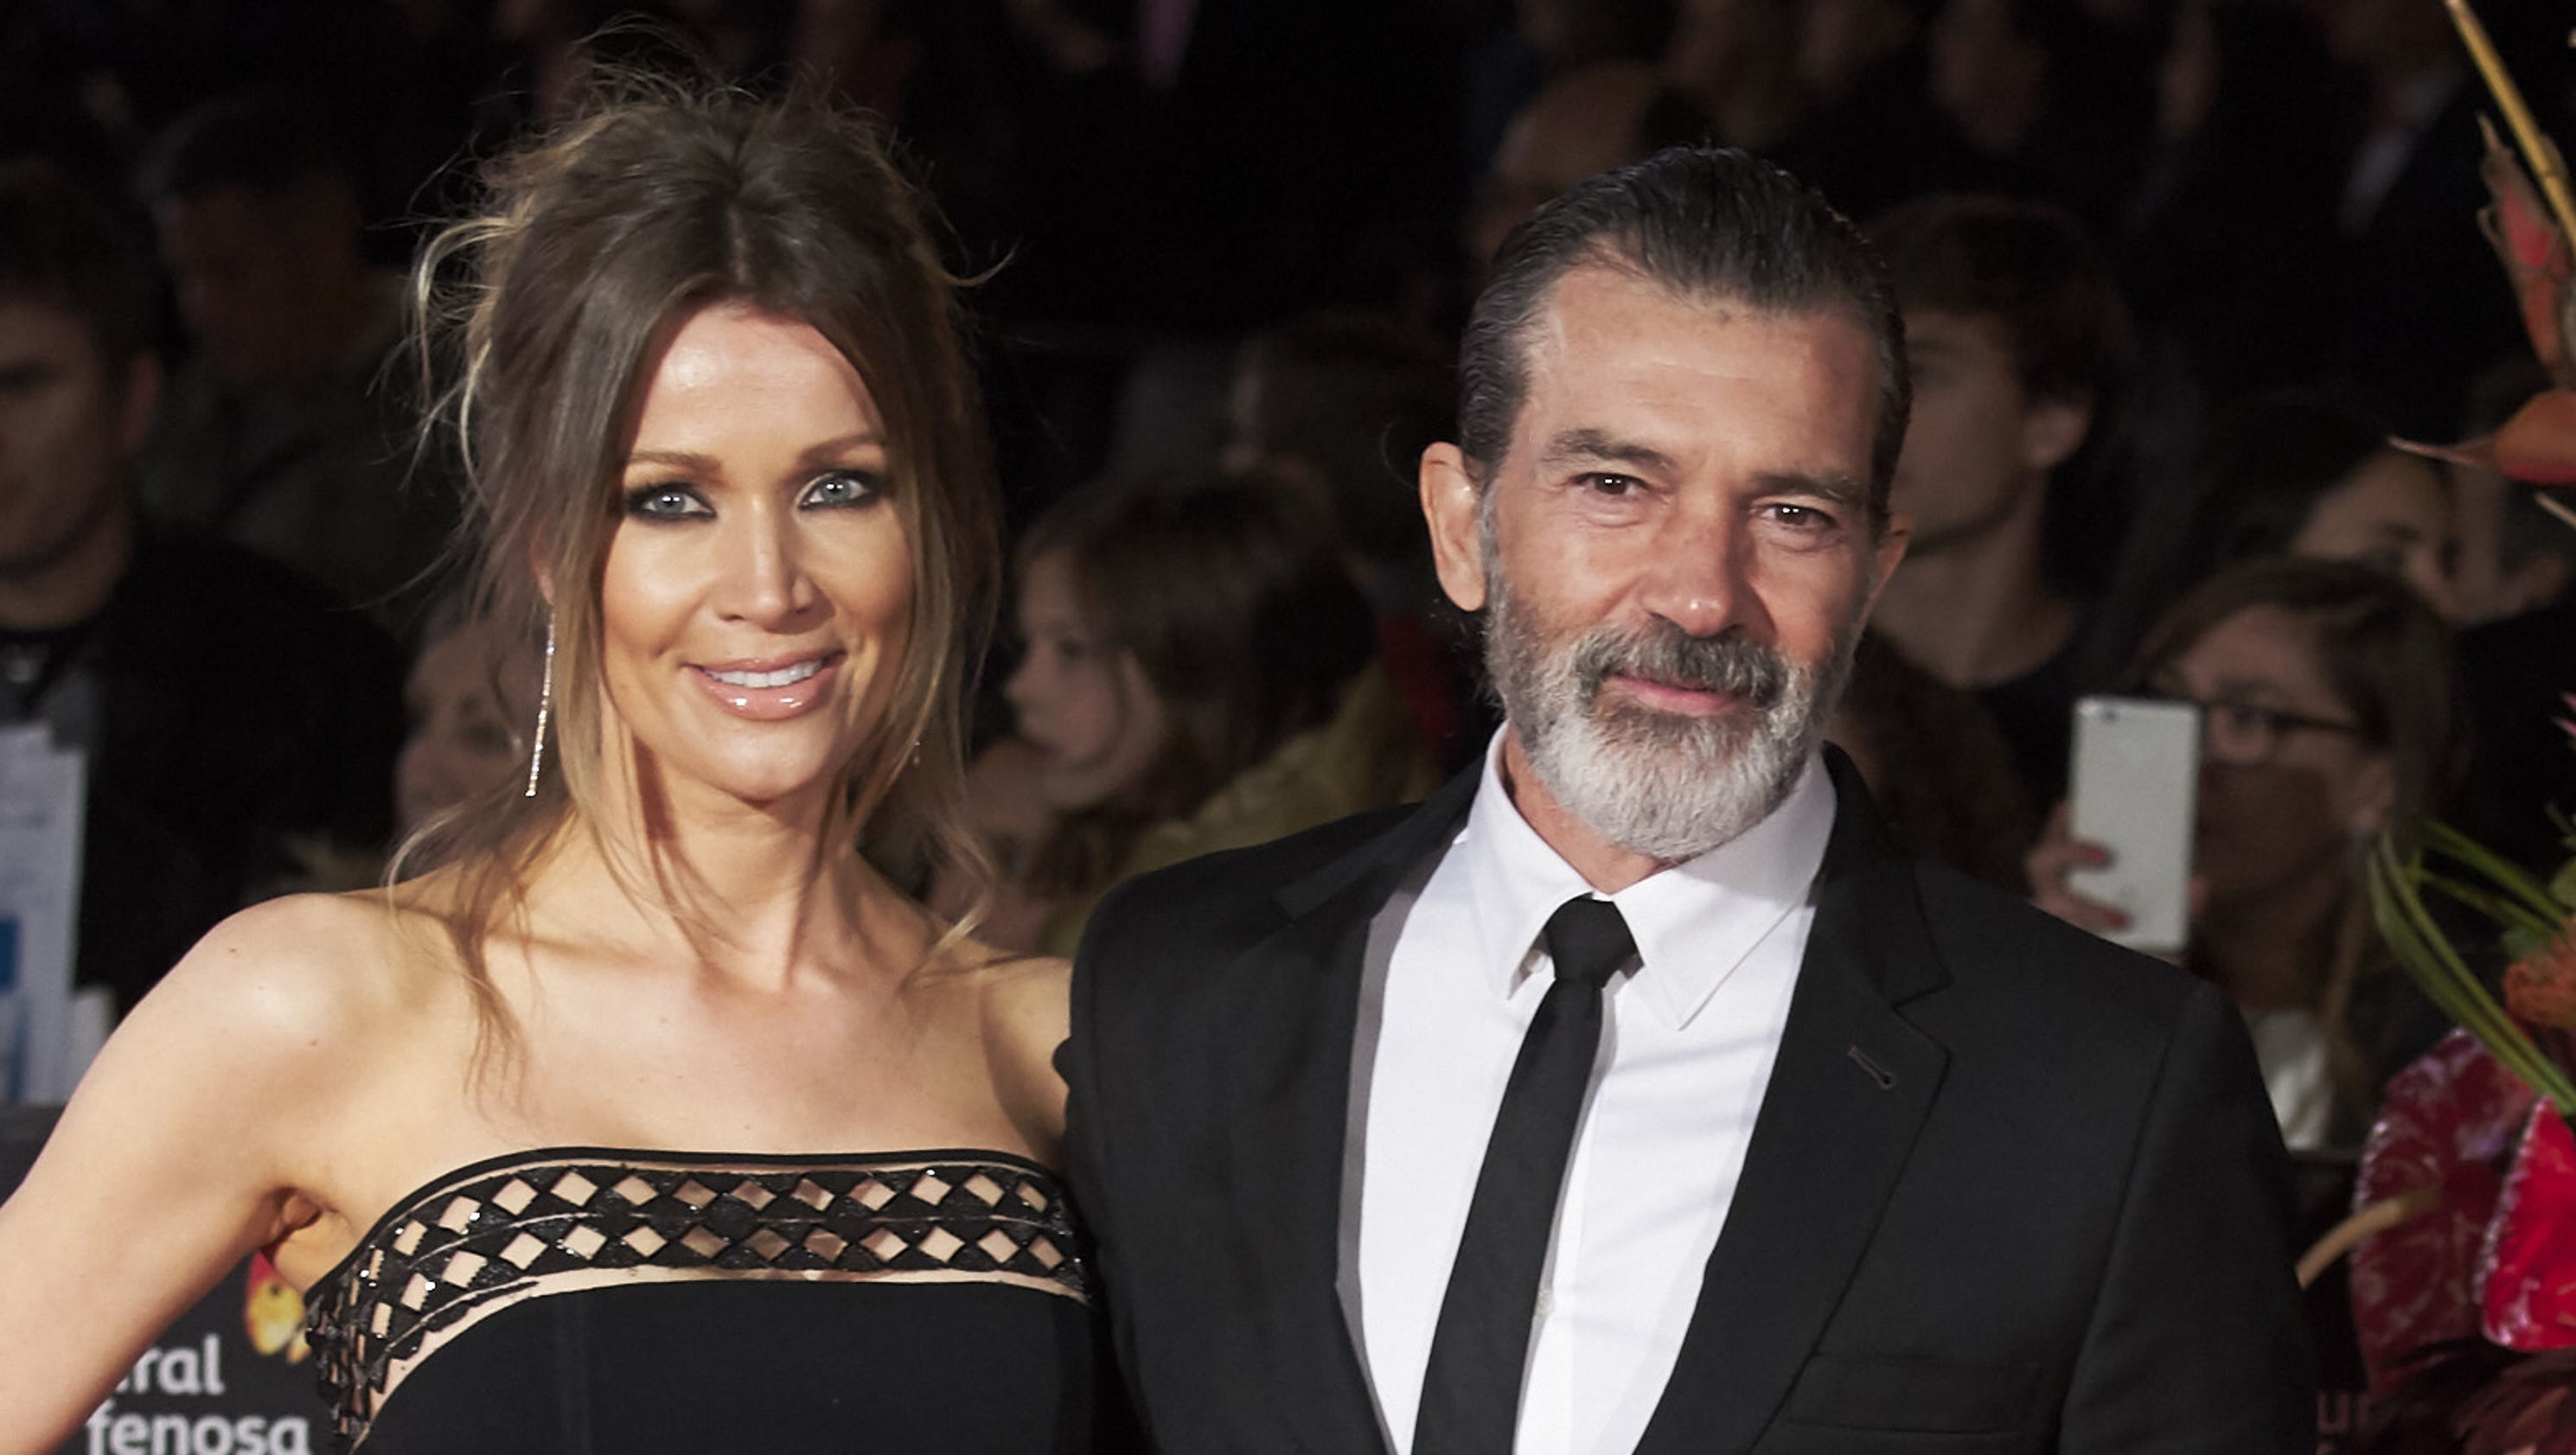 Antonio Banderas suffered heart attack in January, but 'it wasn't serious'3200 x 1680